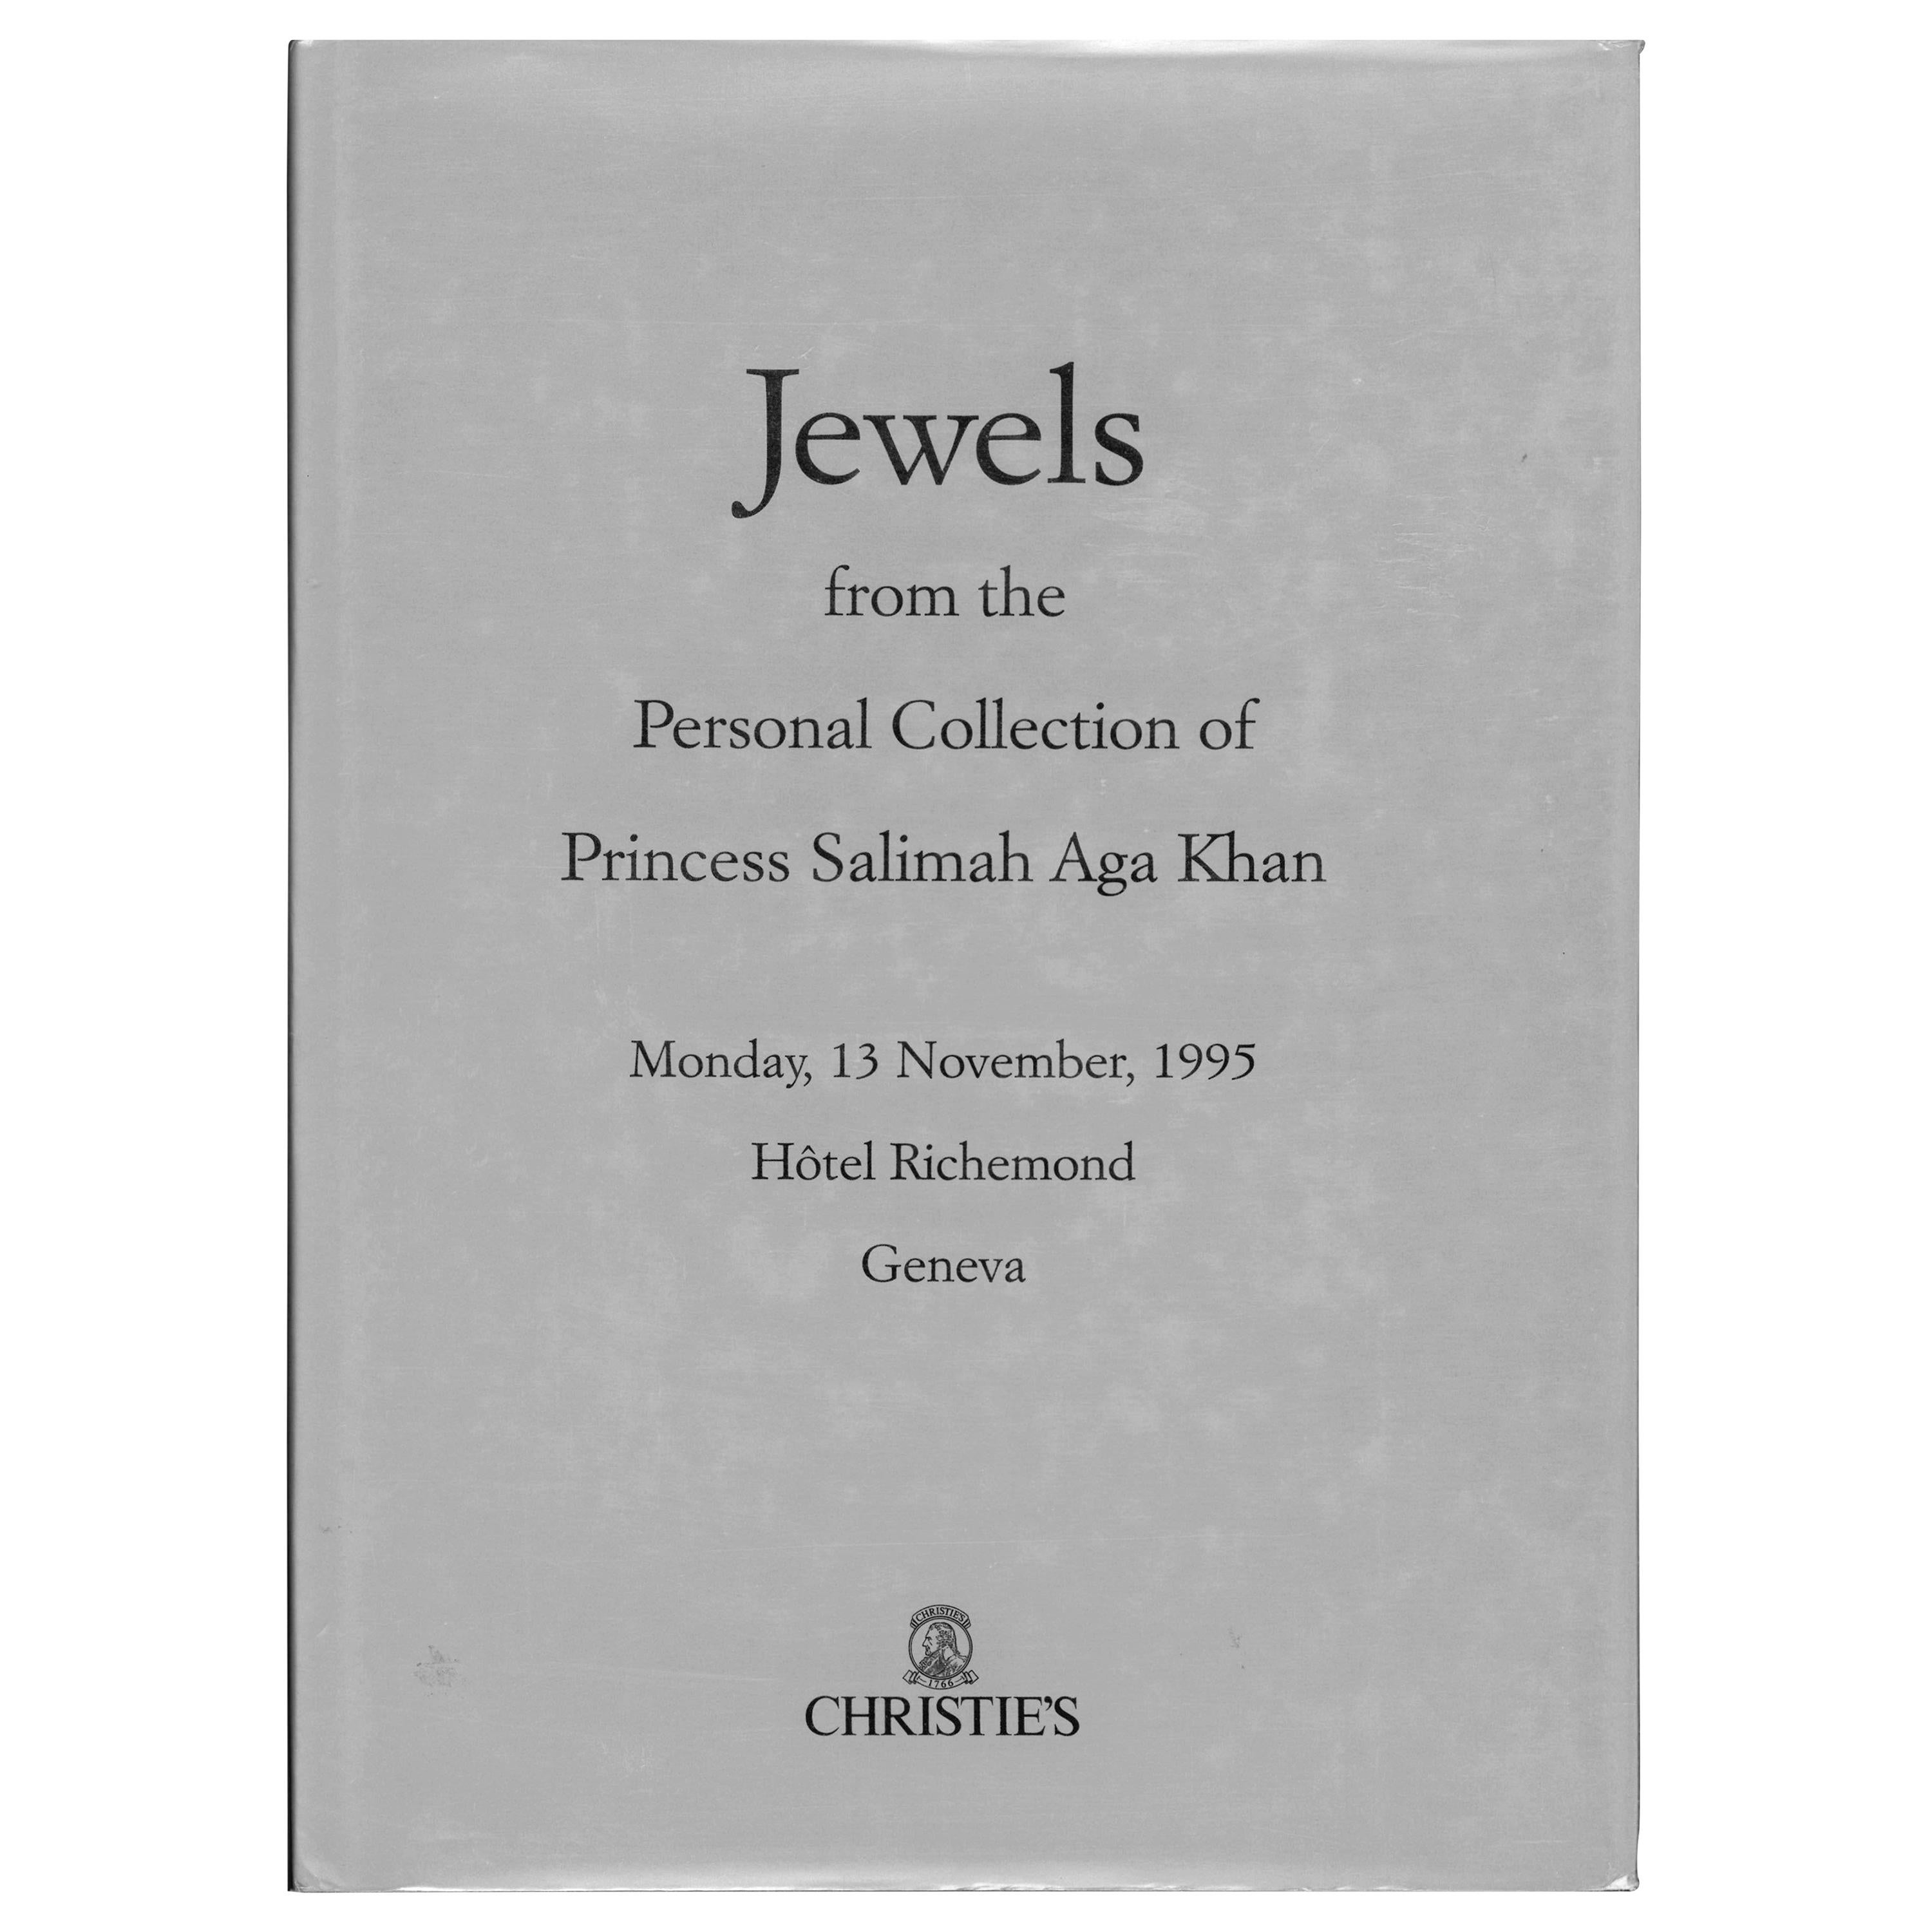 Jewels from the Collection of Princess Salimah Aga Khan, Christies, 1995